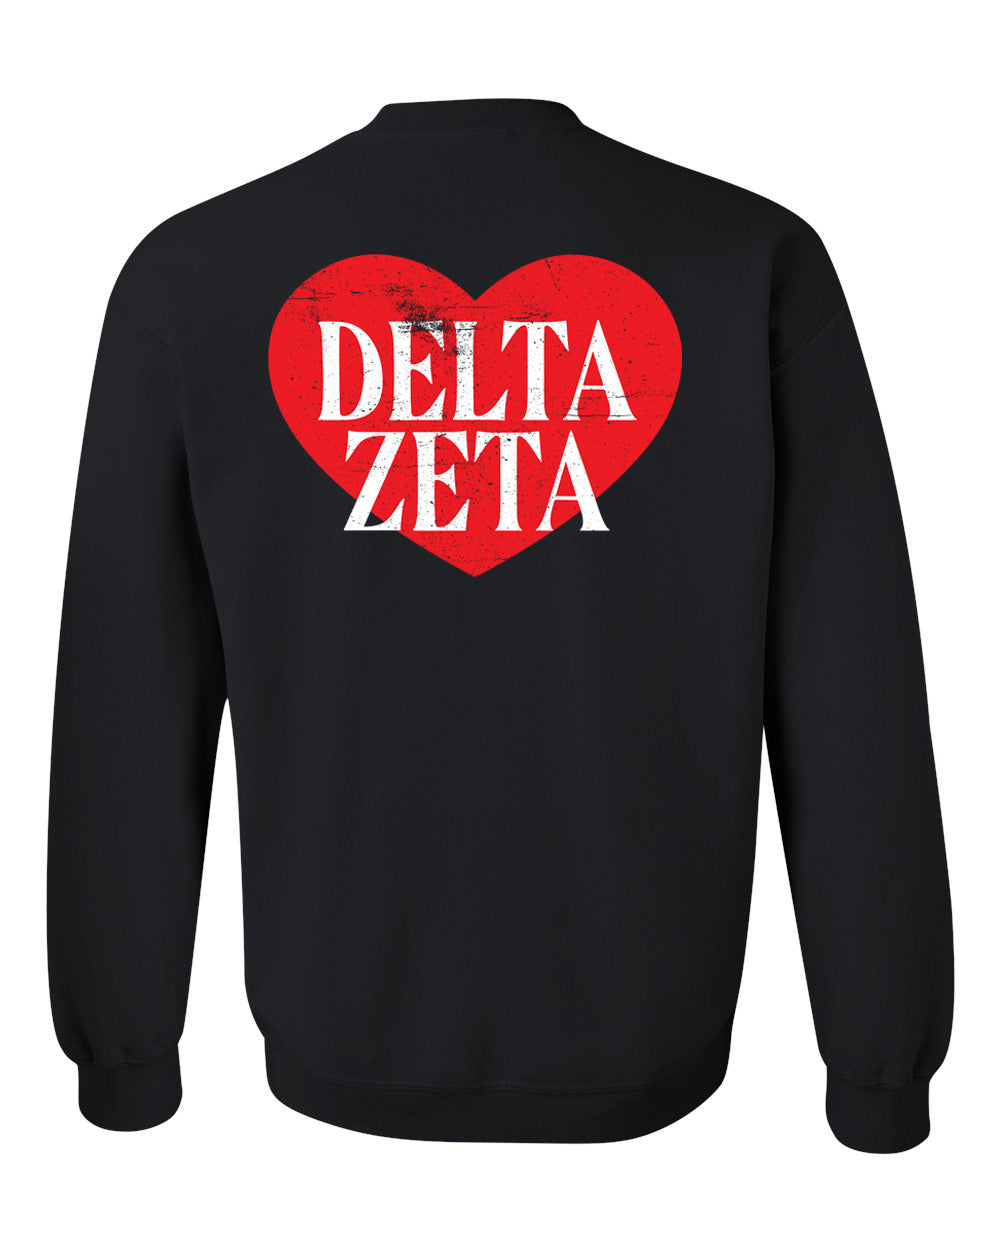 a black sweatshirt with a red heart that says delta zeta